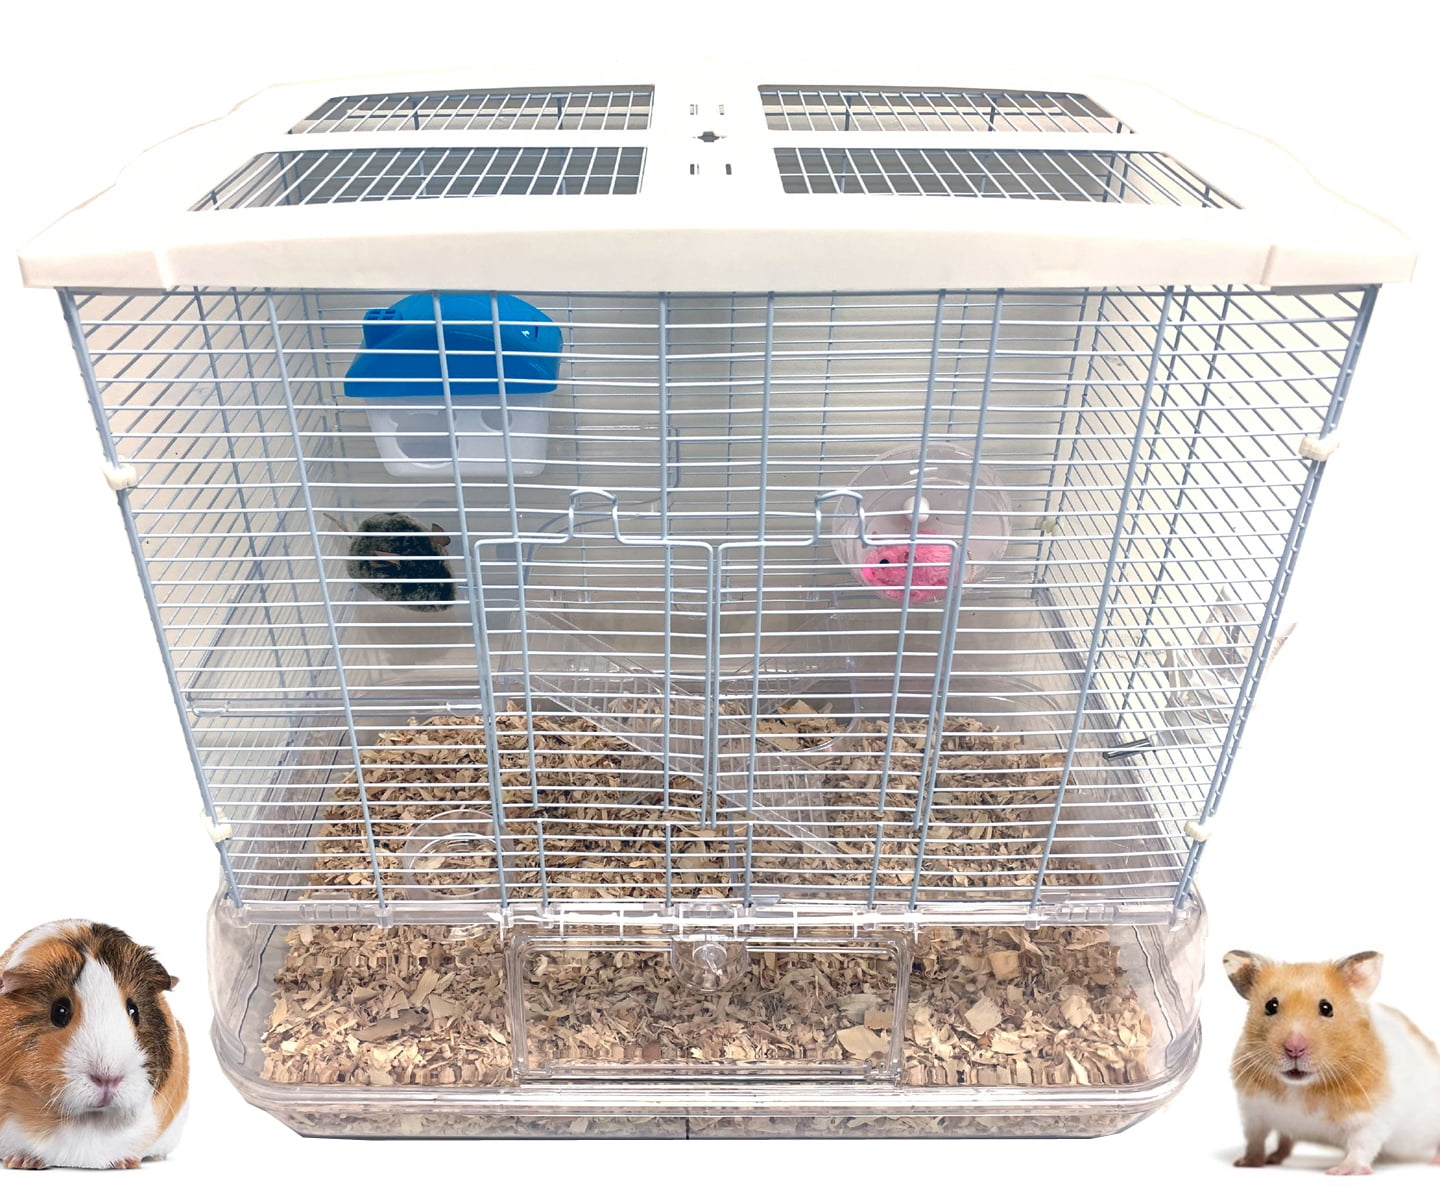 New 3 Solid Floor Levels Habitat Hamster Rodent Gerbil Mouse Mice CageClear Transparent 